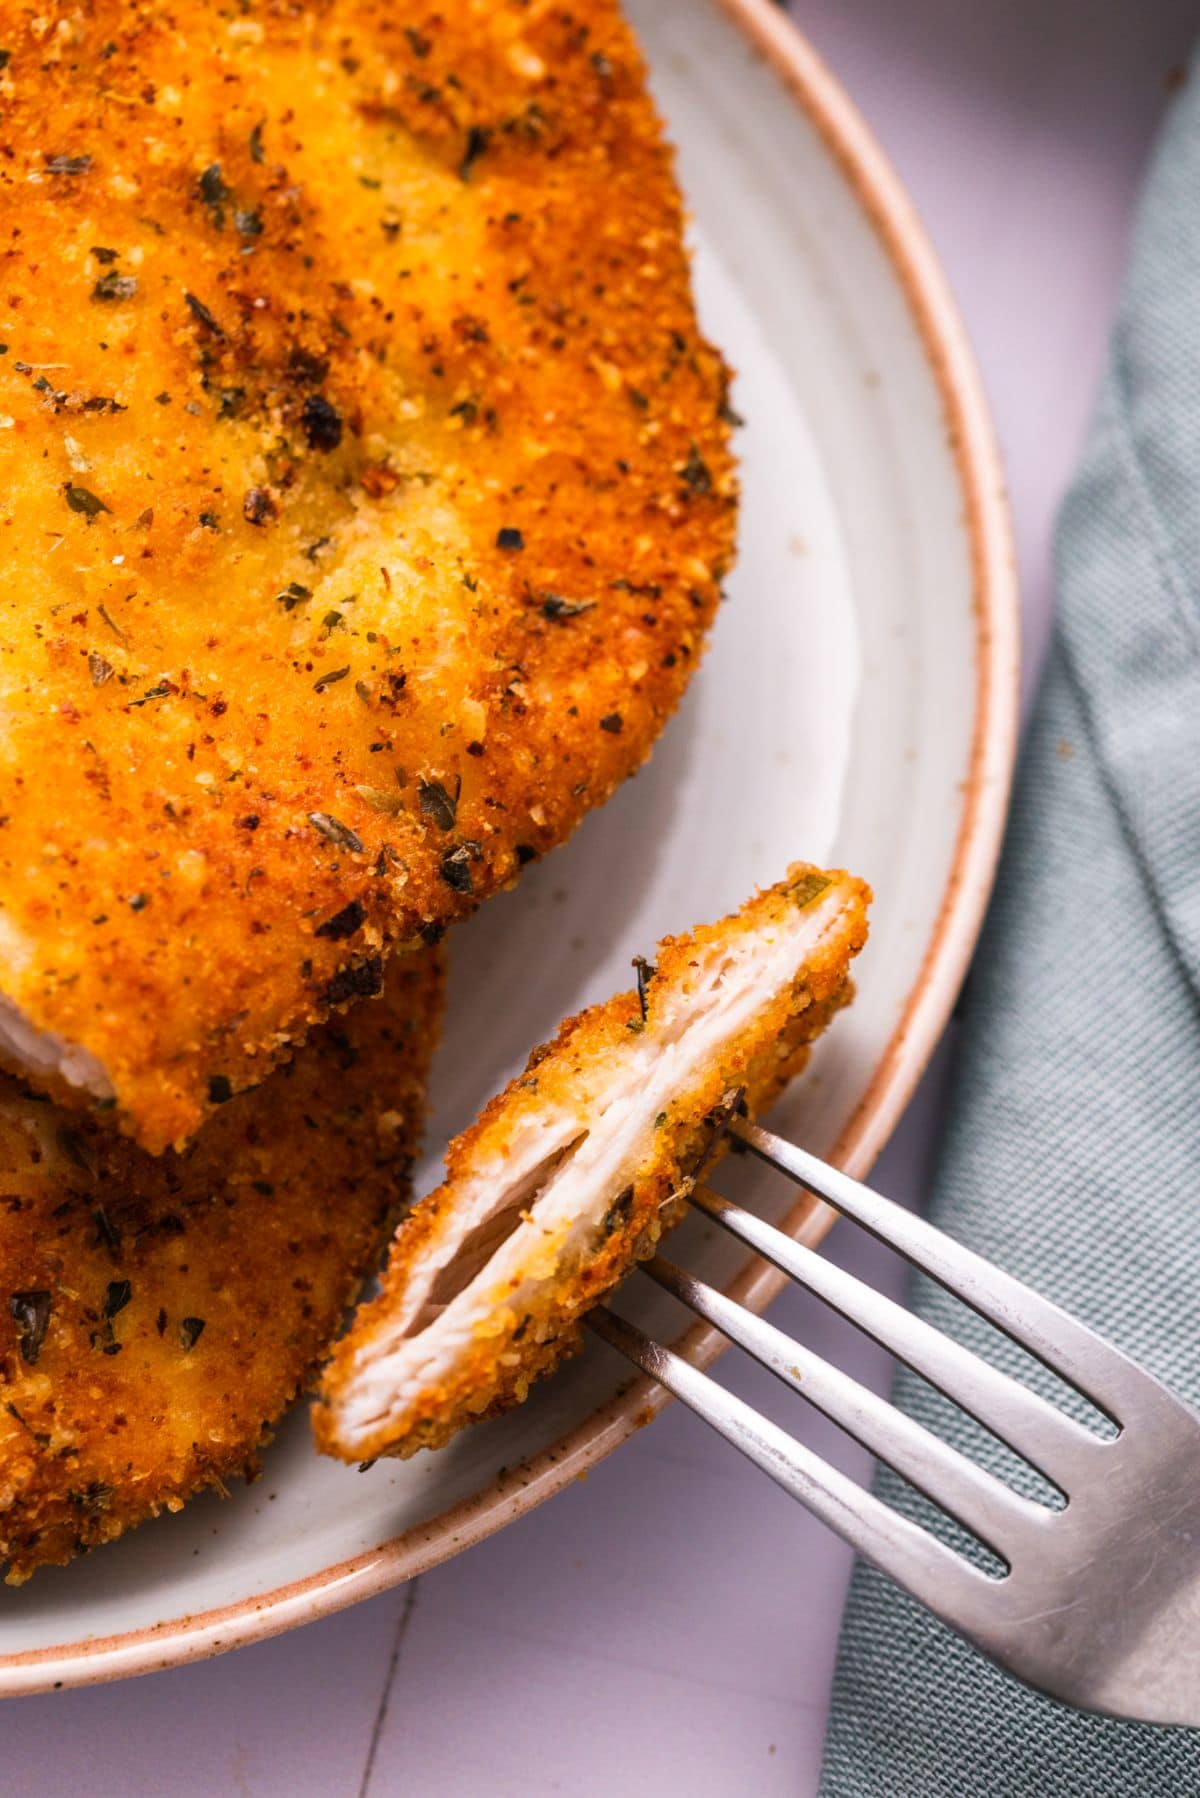 Parmesan crusted chicken 5